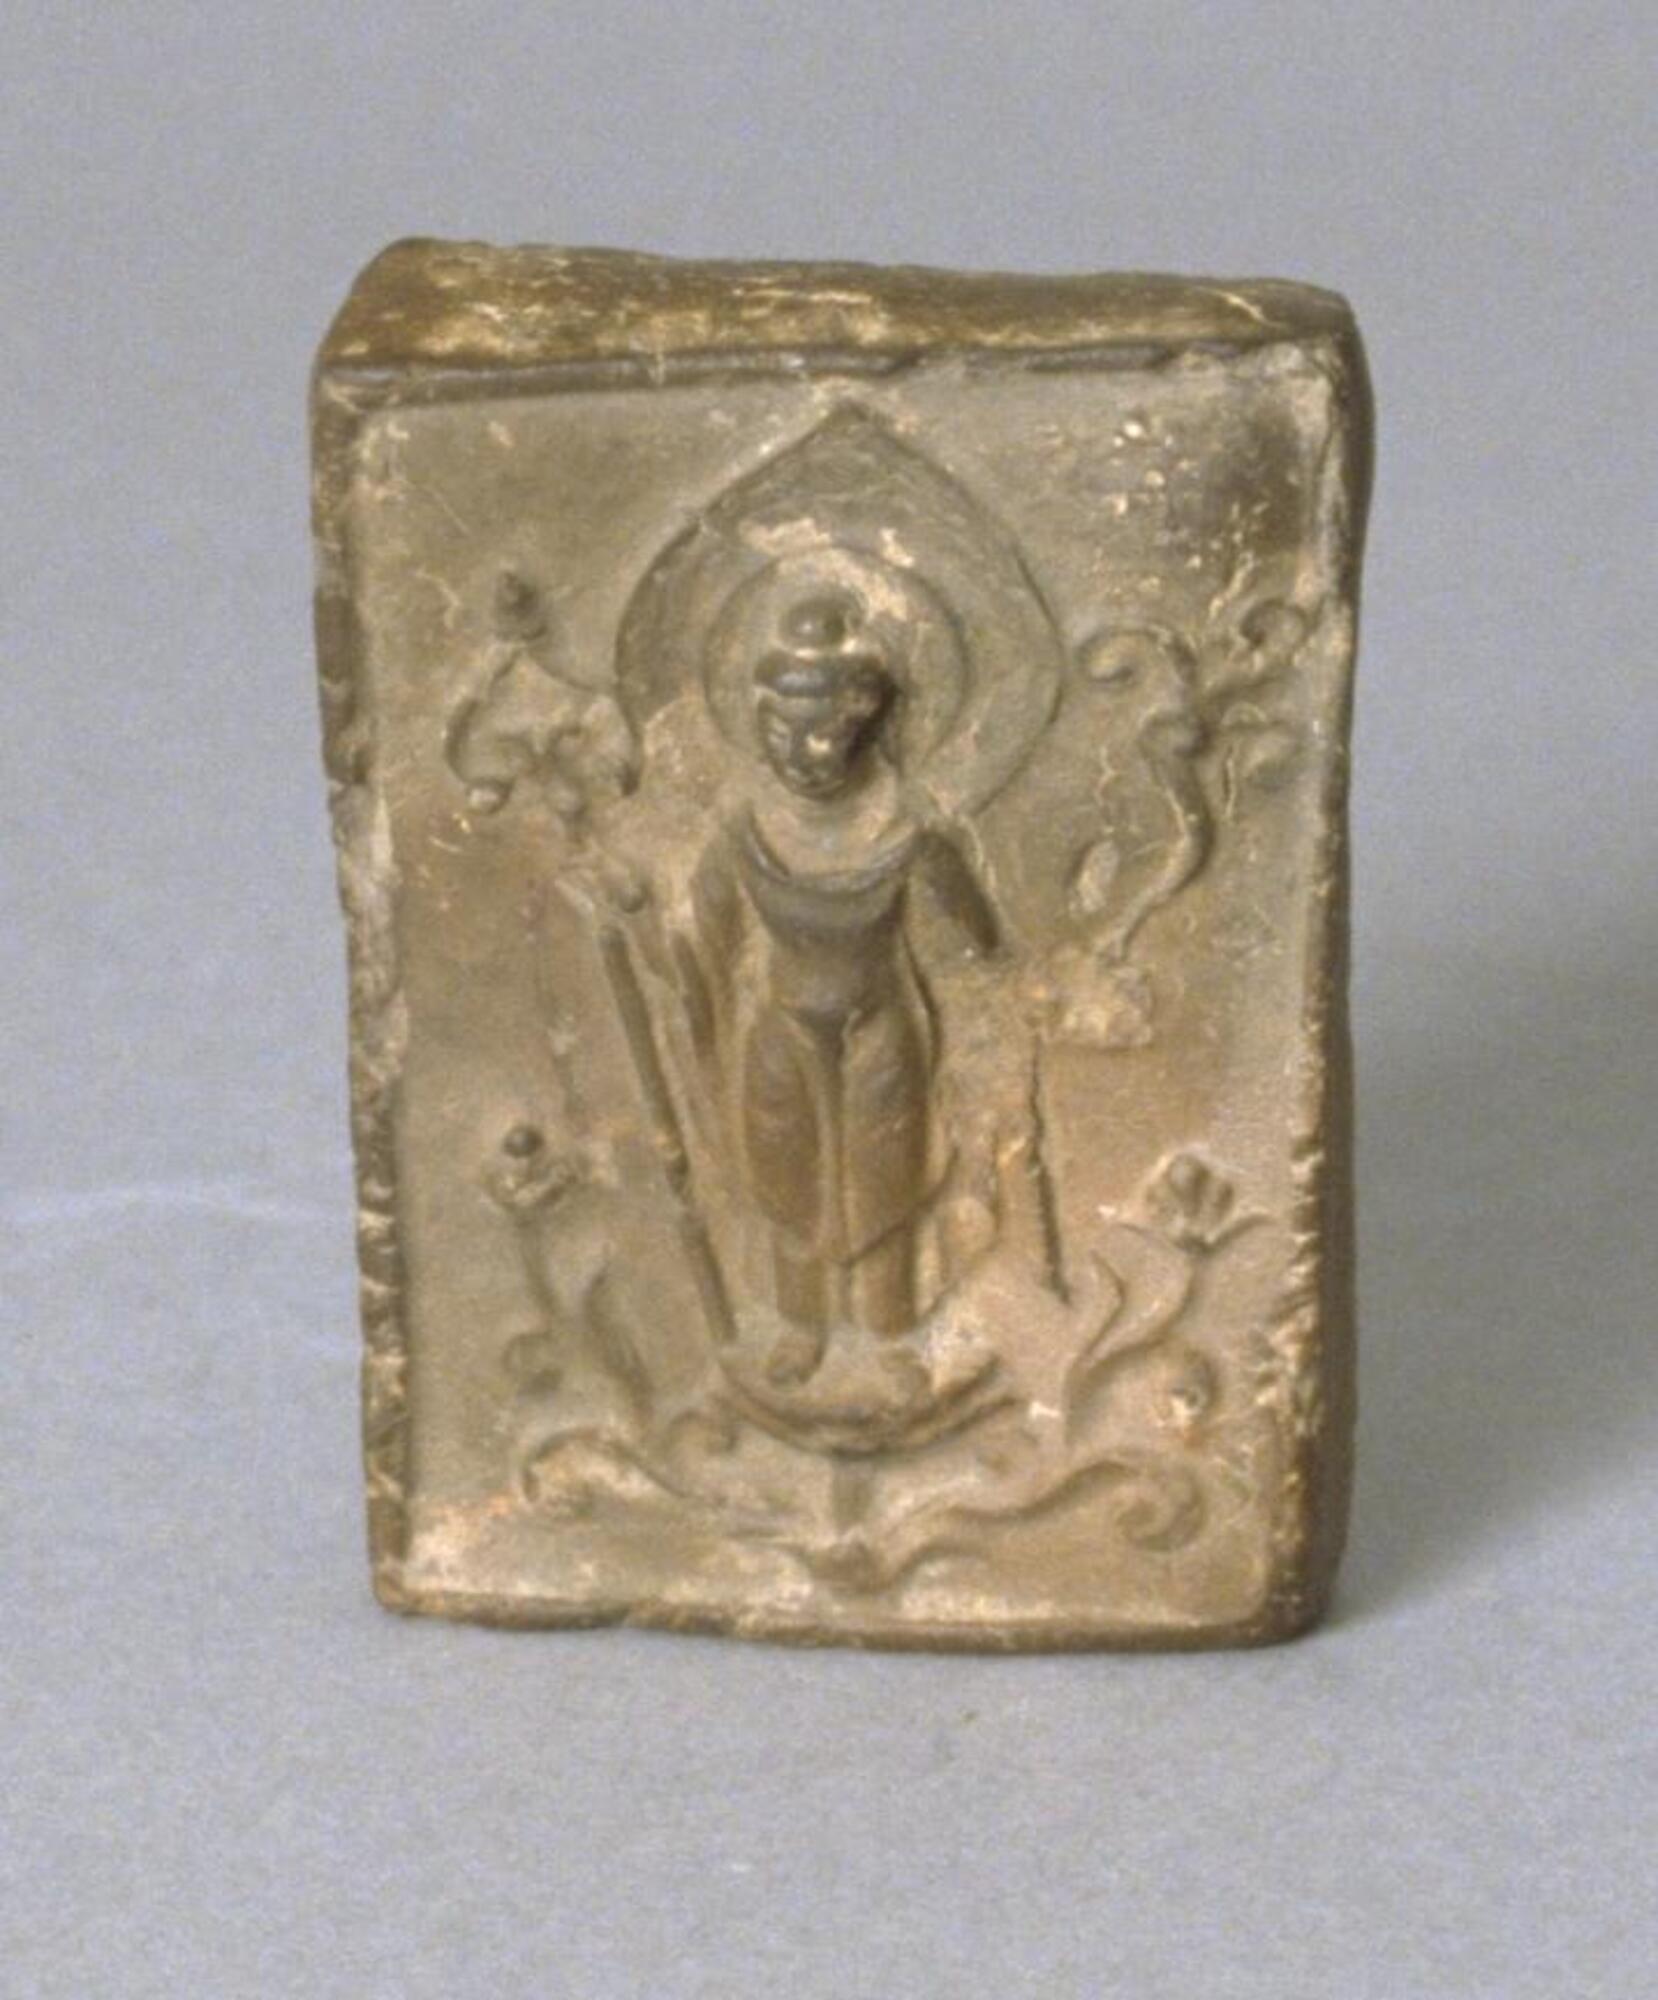 A small, thin, molded clay plaque with a bas-relief scene.